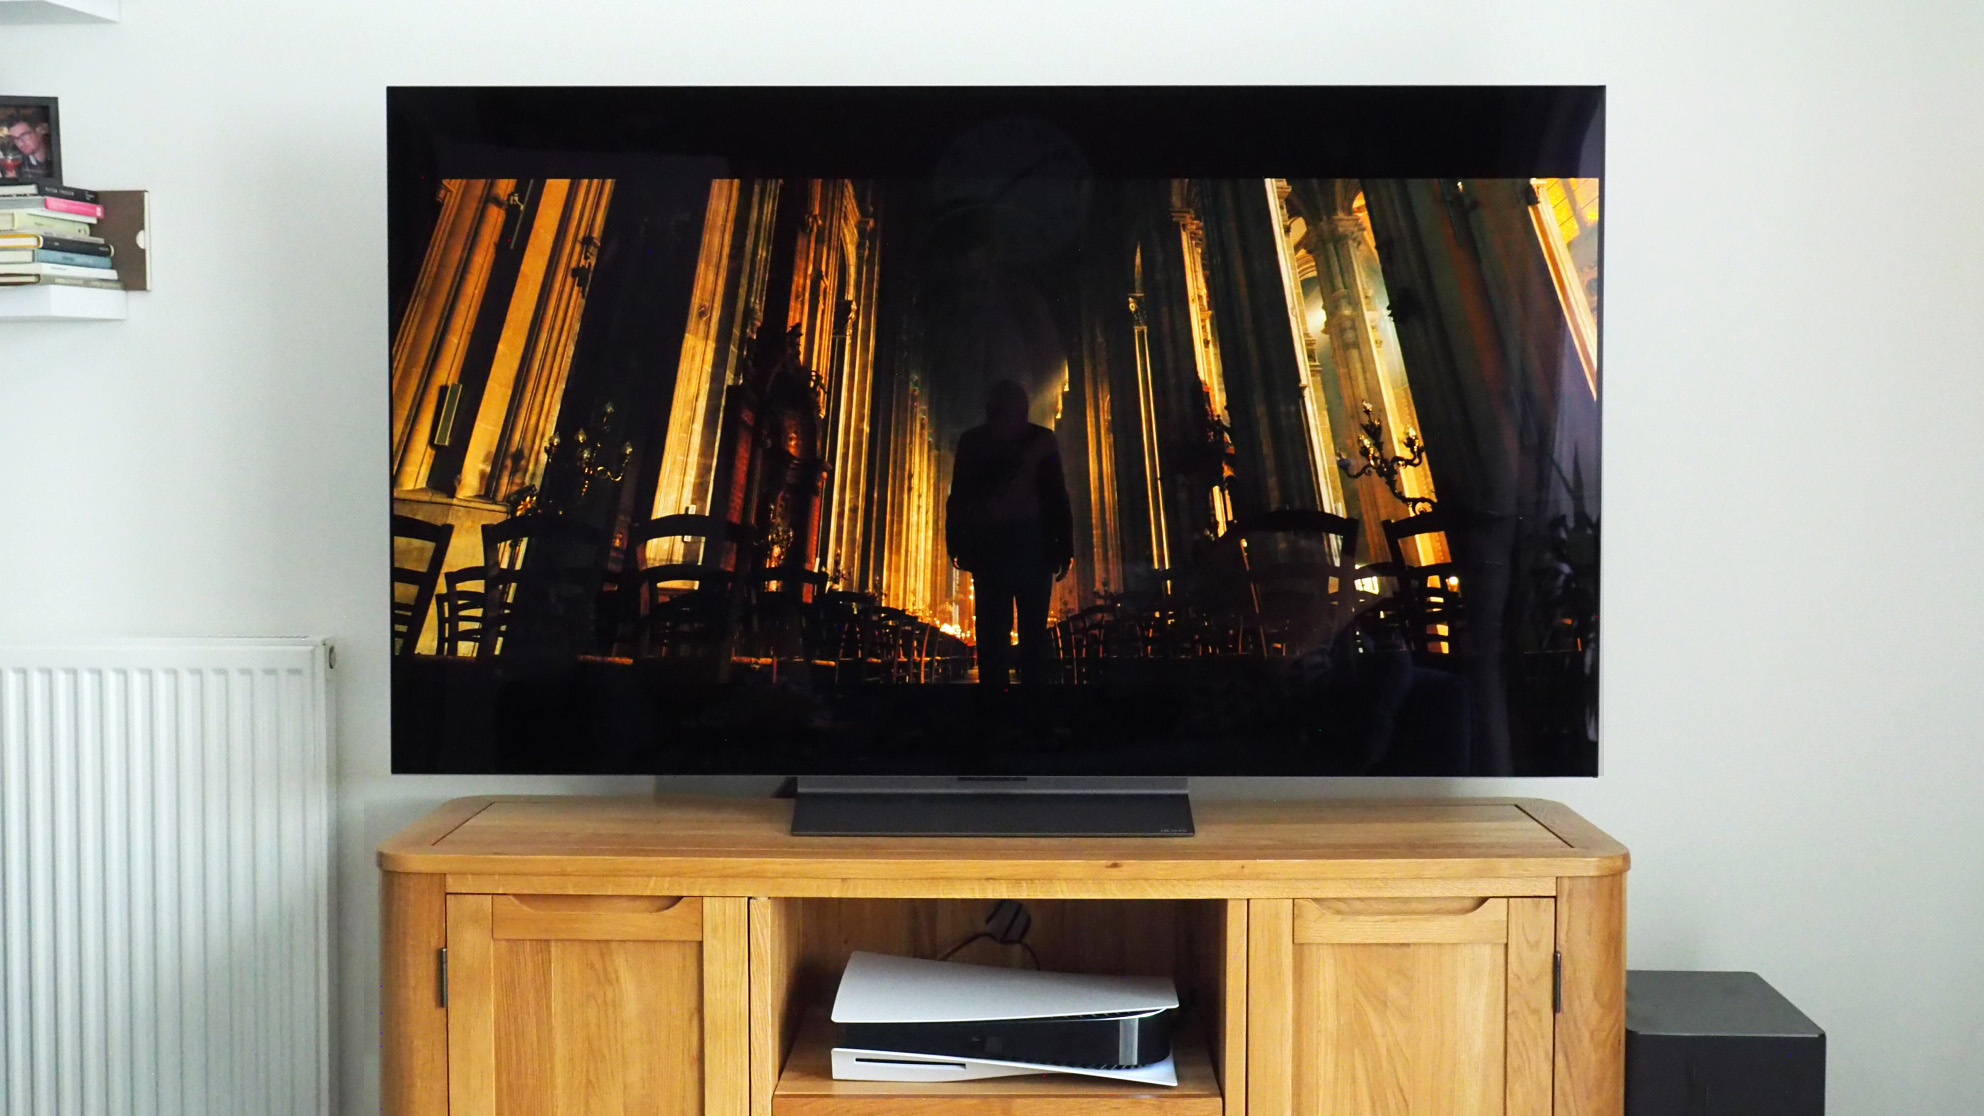 LG OLED65C3 review: get your expression enhanced